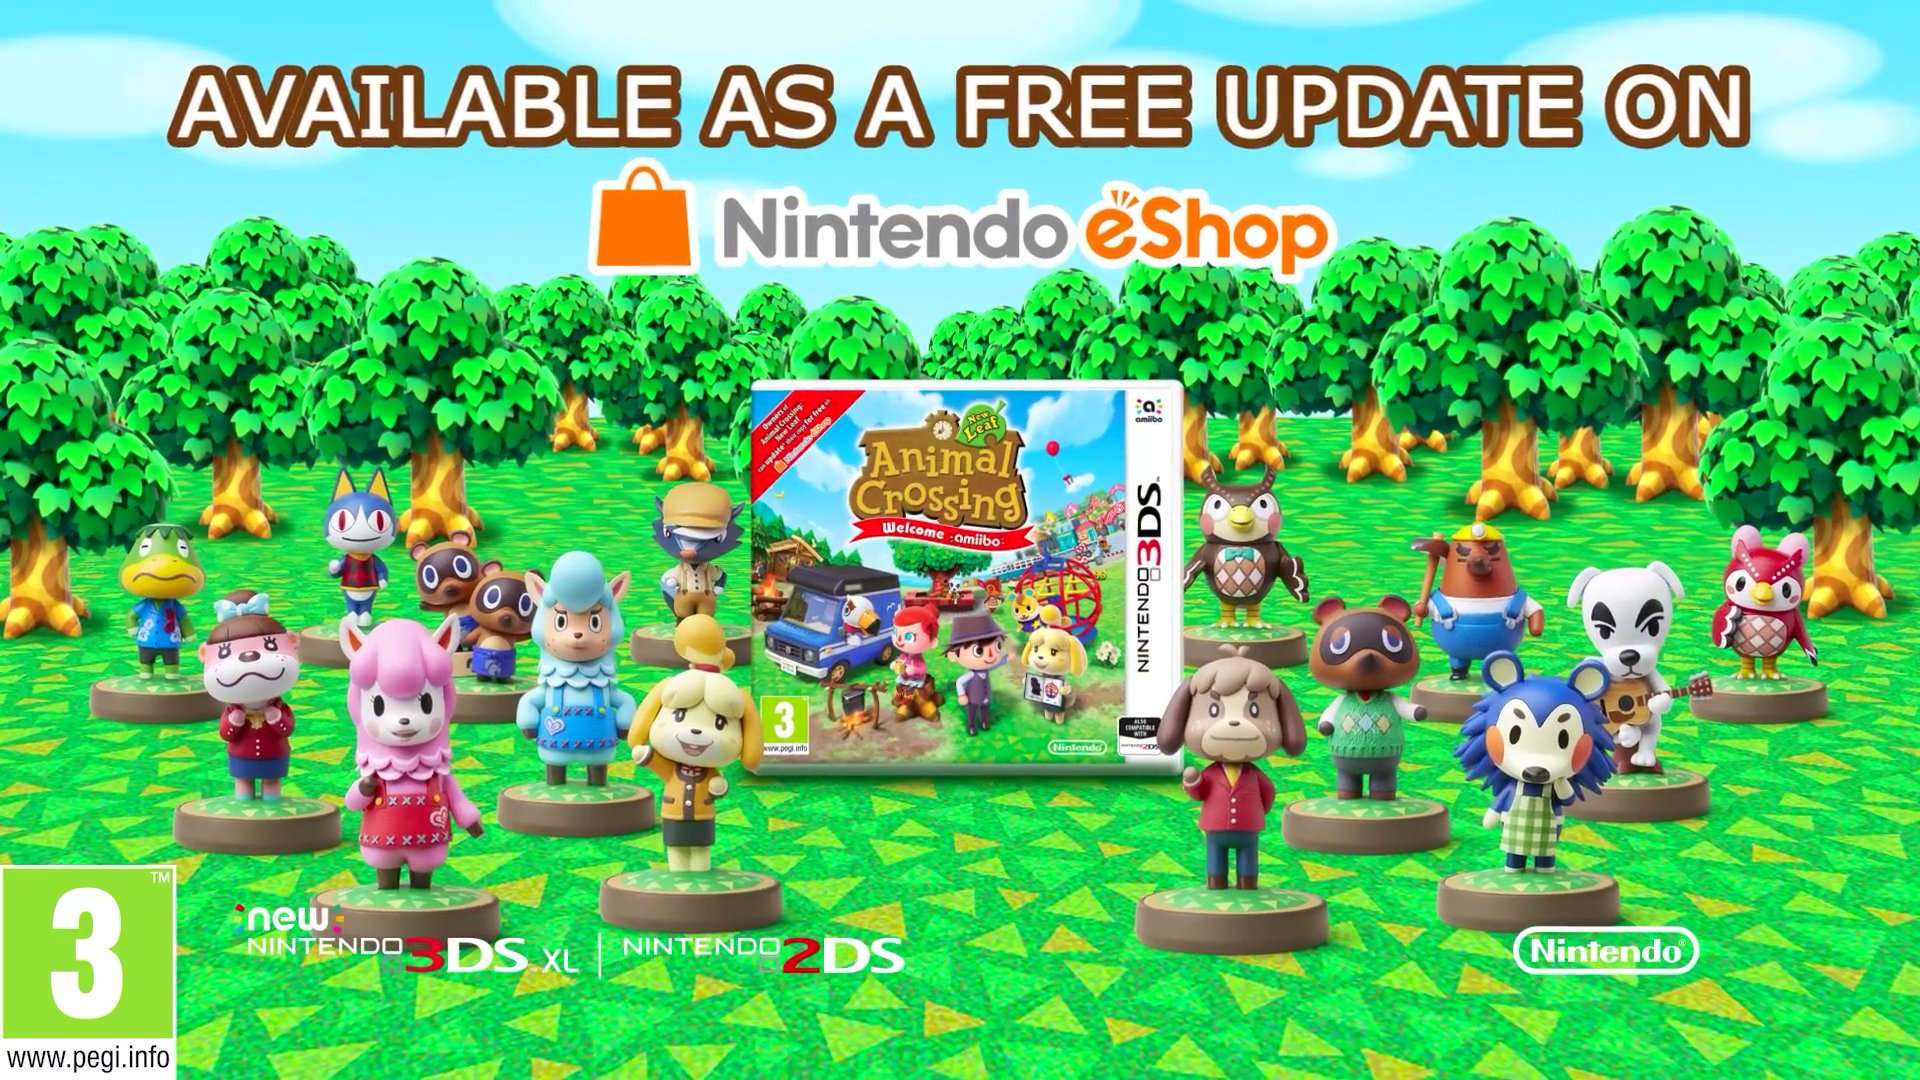 and dont worry about the cart size they can include the base game on cart and have the dlc as an additional download at no extra charge